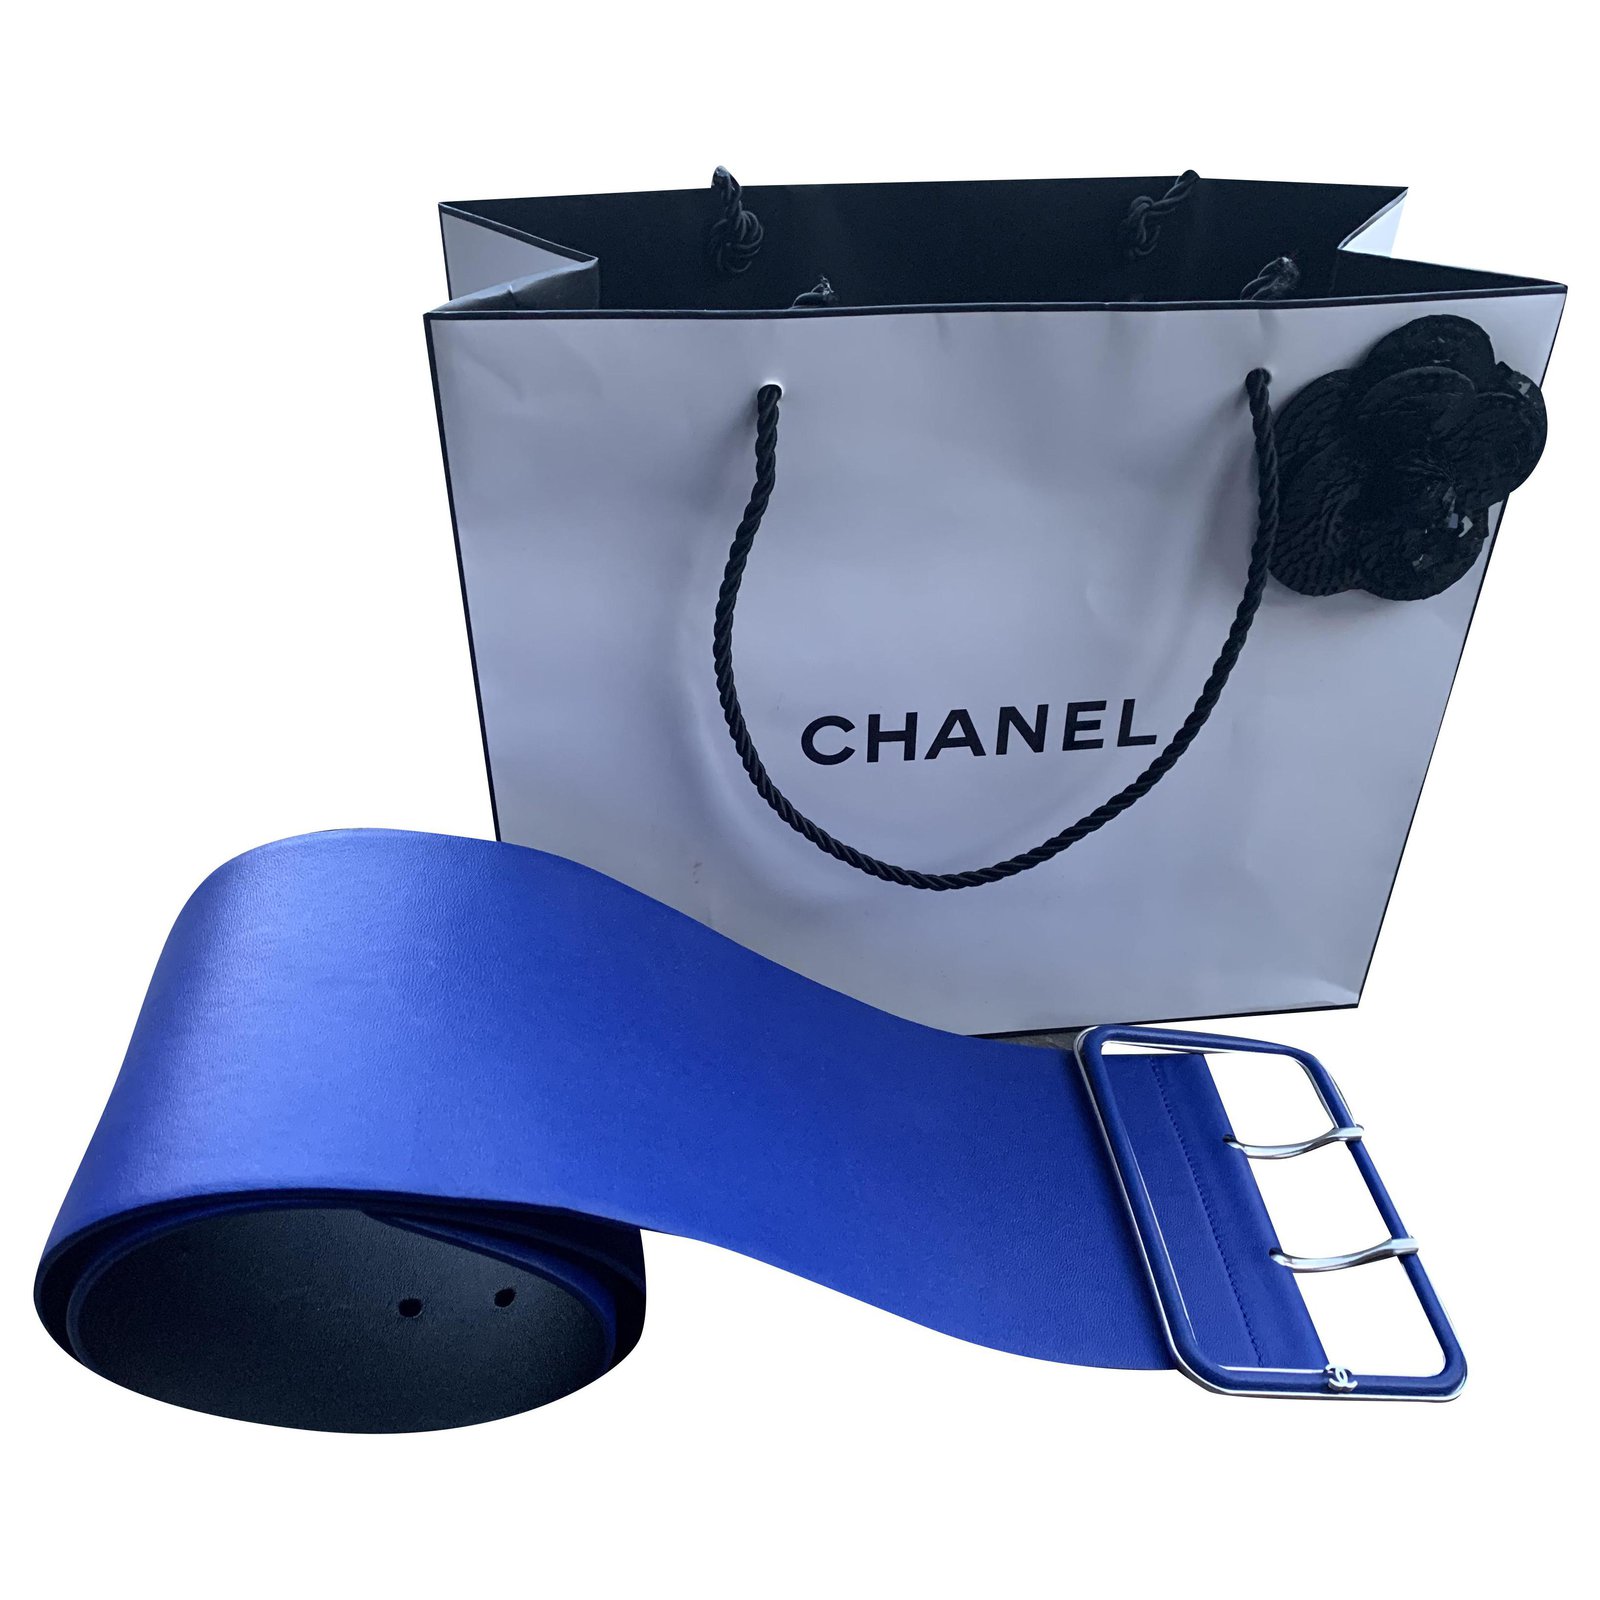 Chanel VIP gifts Navy blue